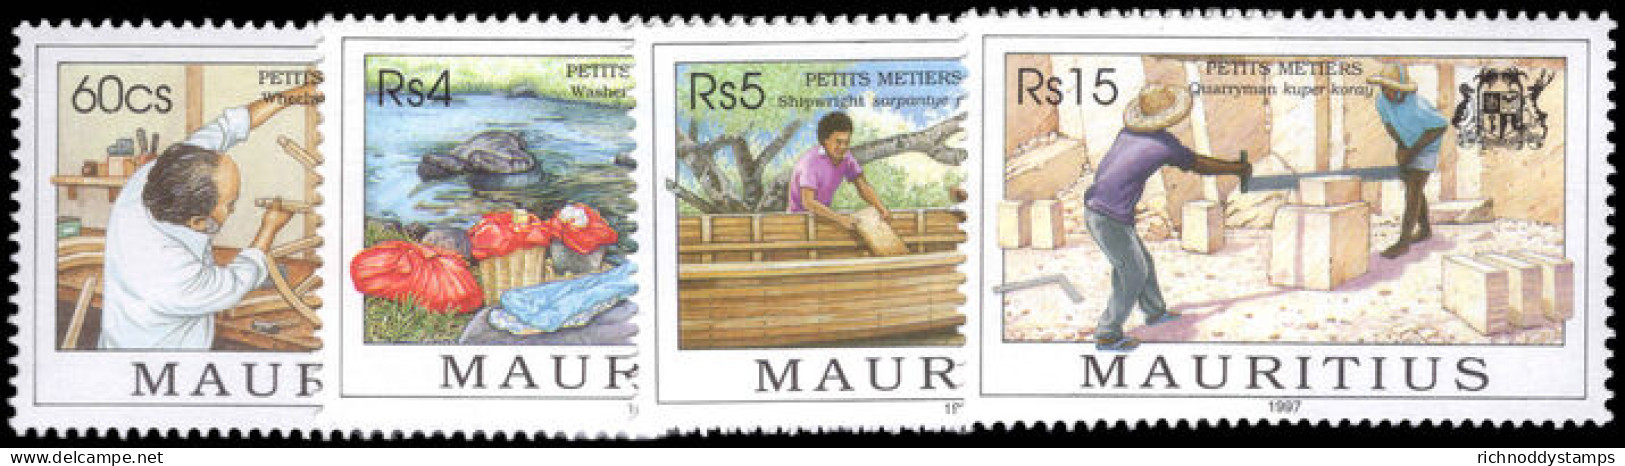 Mauritius 1997 Small Businesses Unmounted Mint. - Maurice (1968-...)